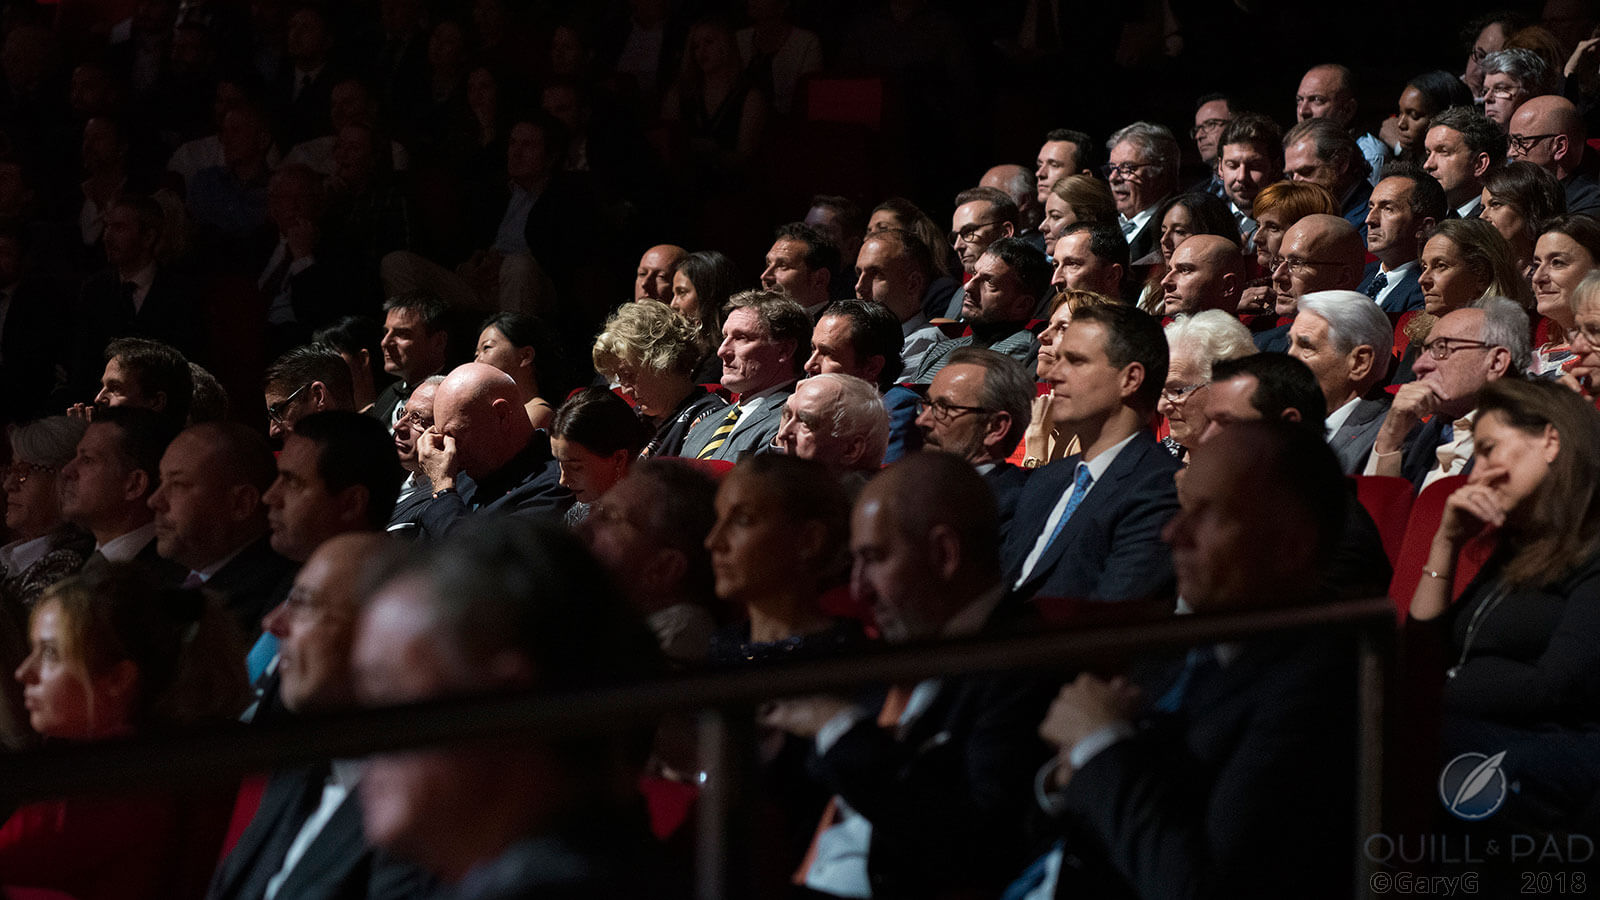 Breathtaking moment: Jean-Claude Biver (at left with hand to face) as his Special Jury Award is announced at the 2018 Grand Prix d’Horlogerie de Genève